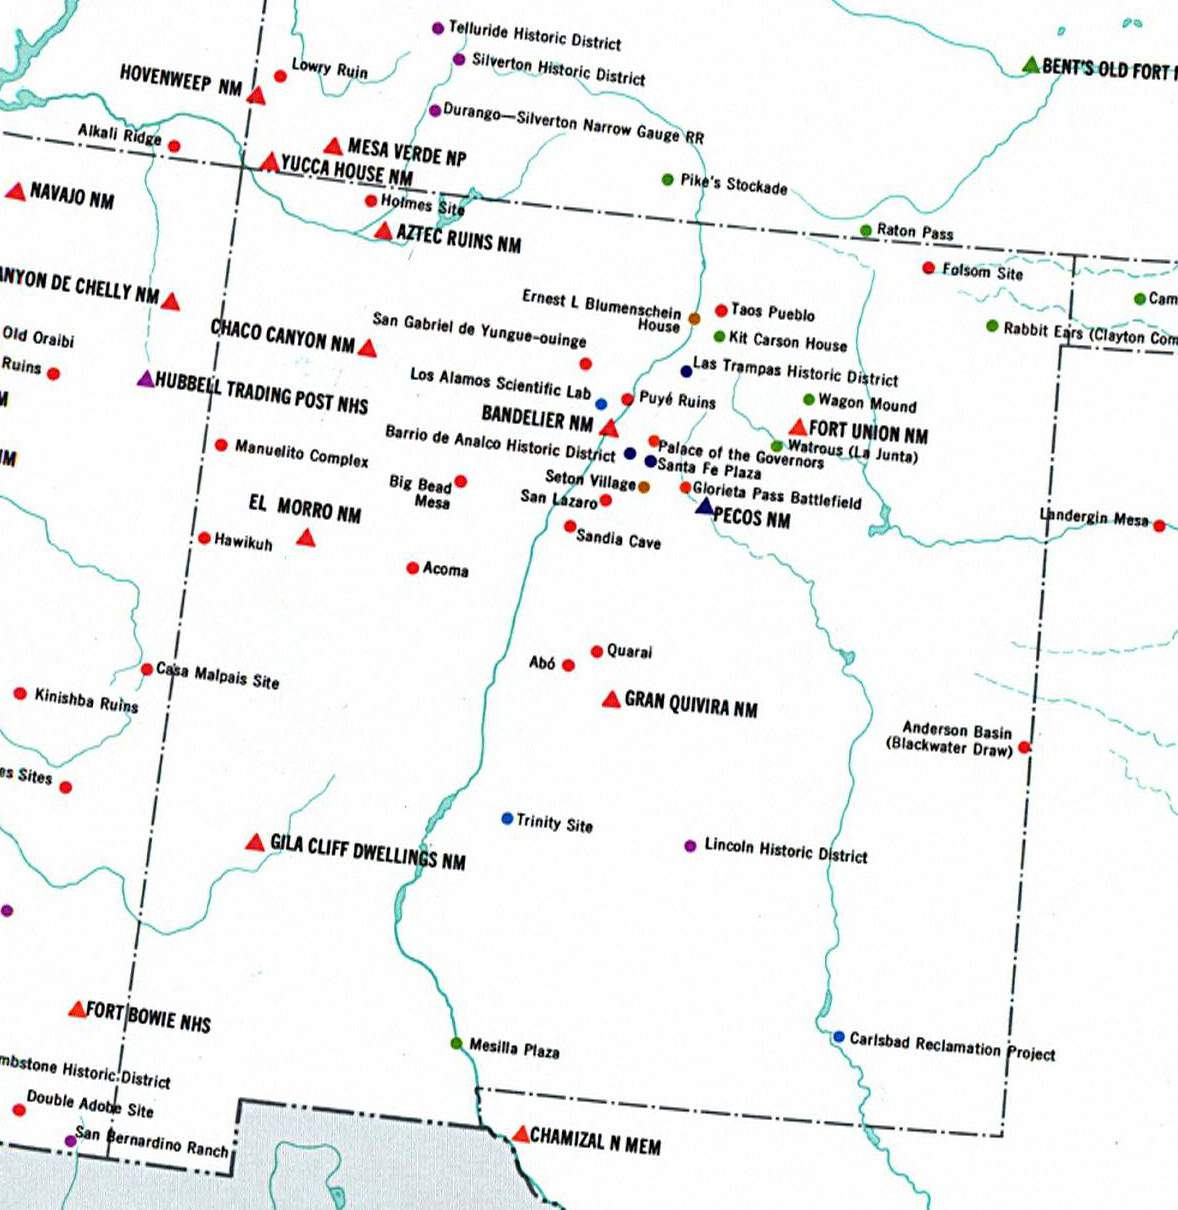 Map of New Mexico - Historic Sites and Landmarks